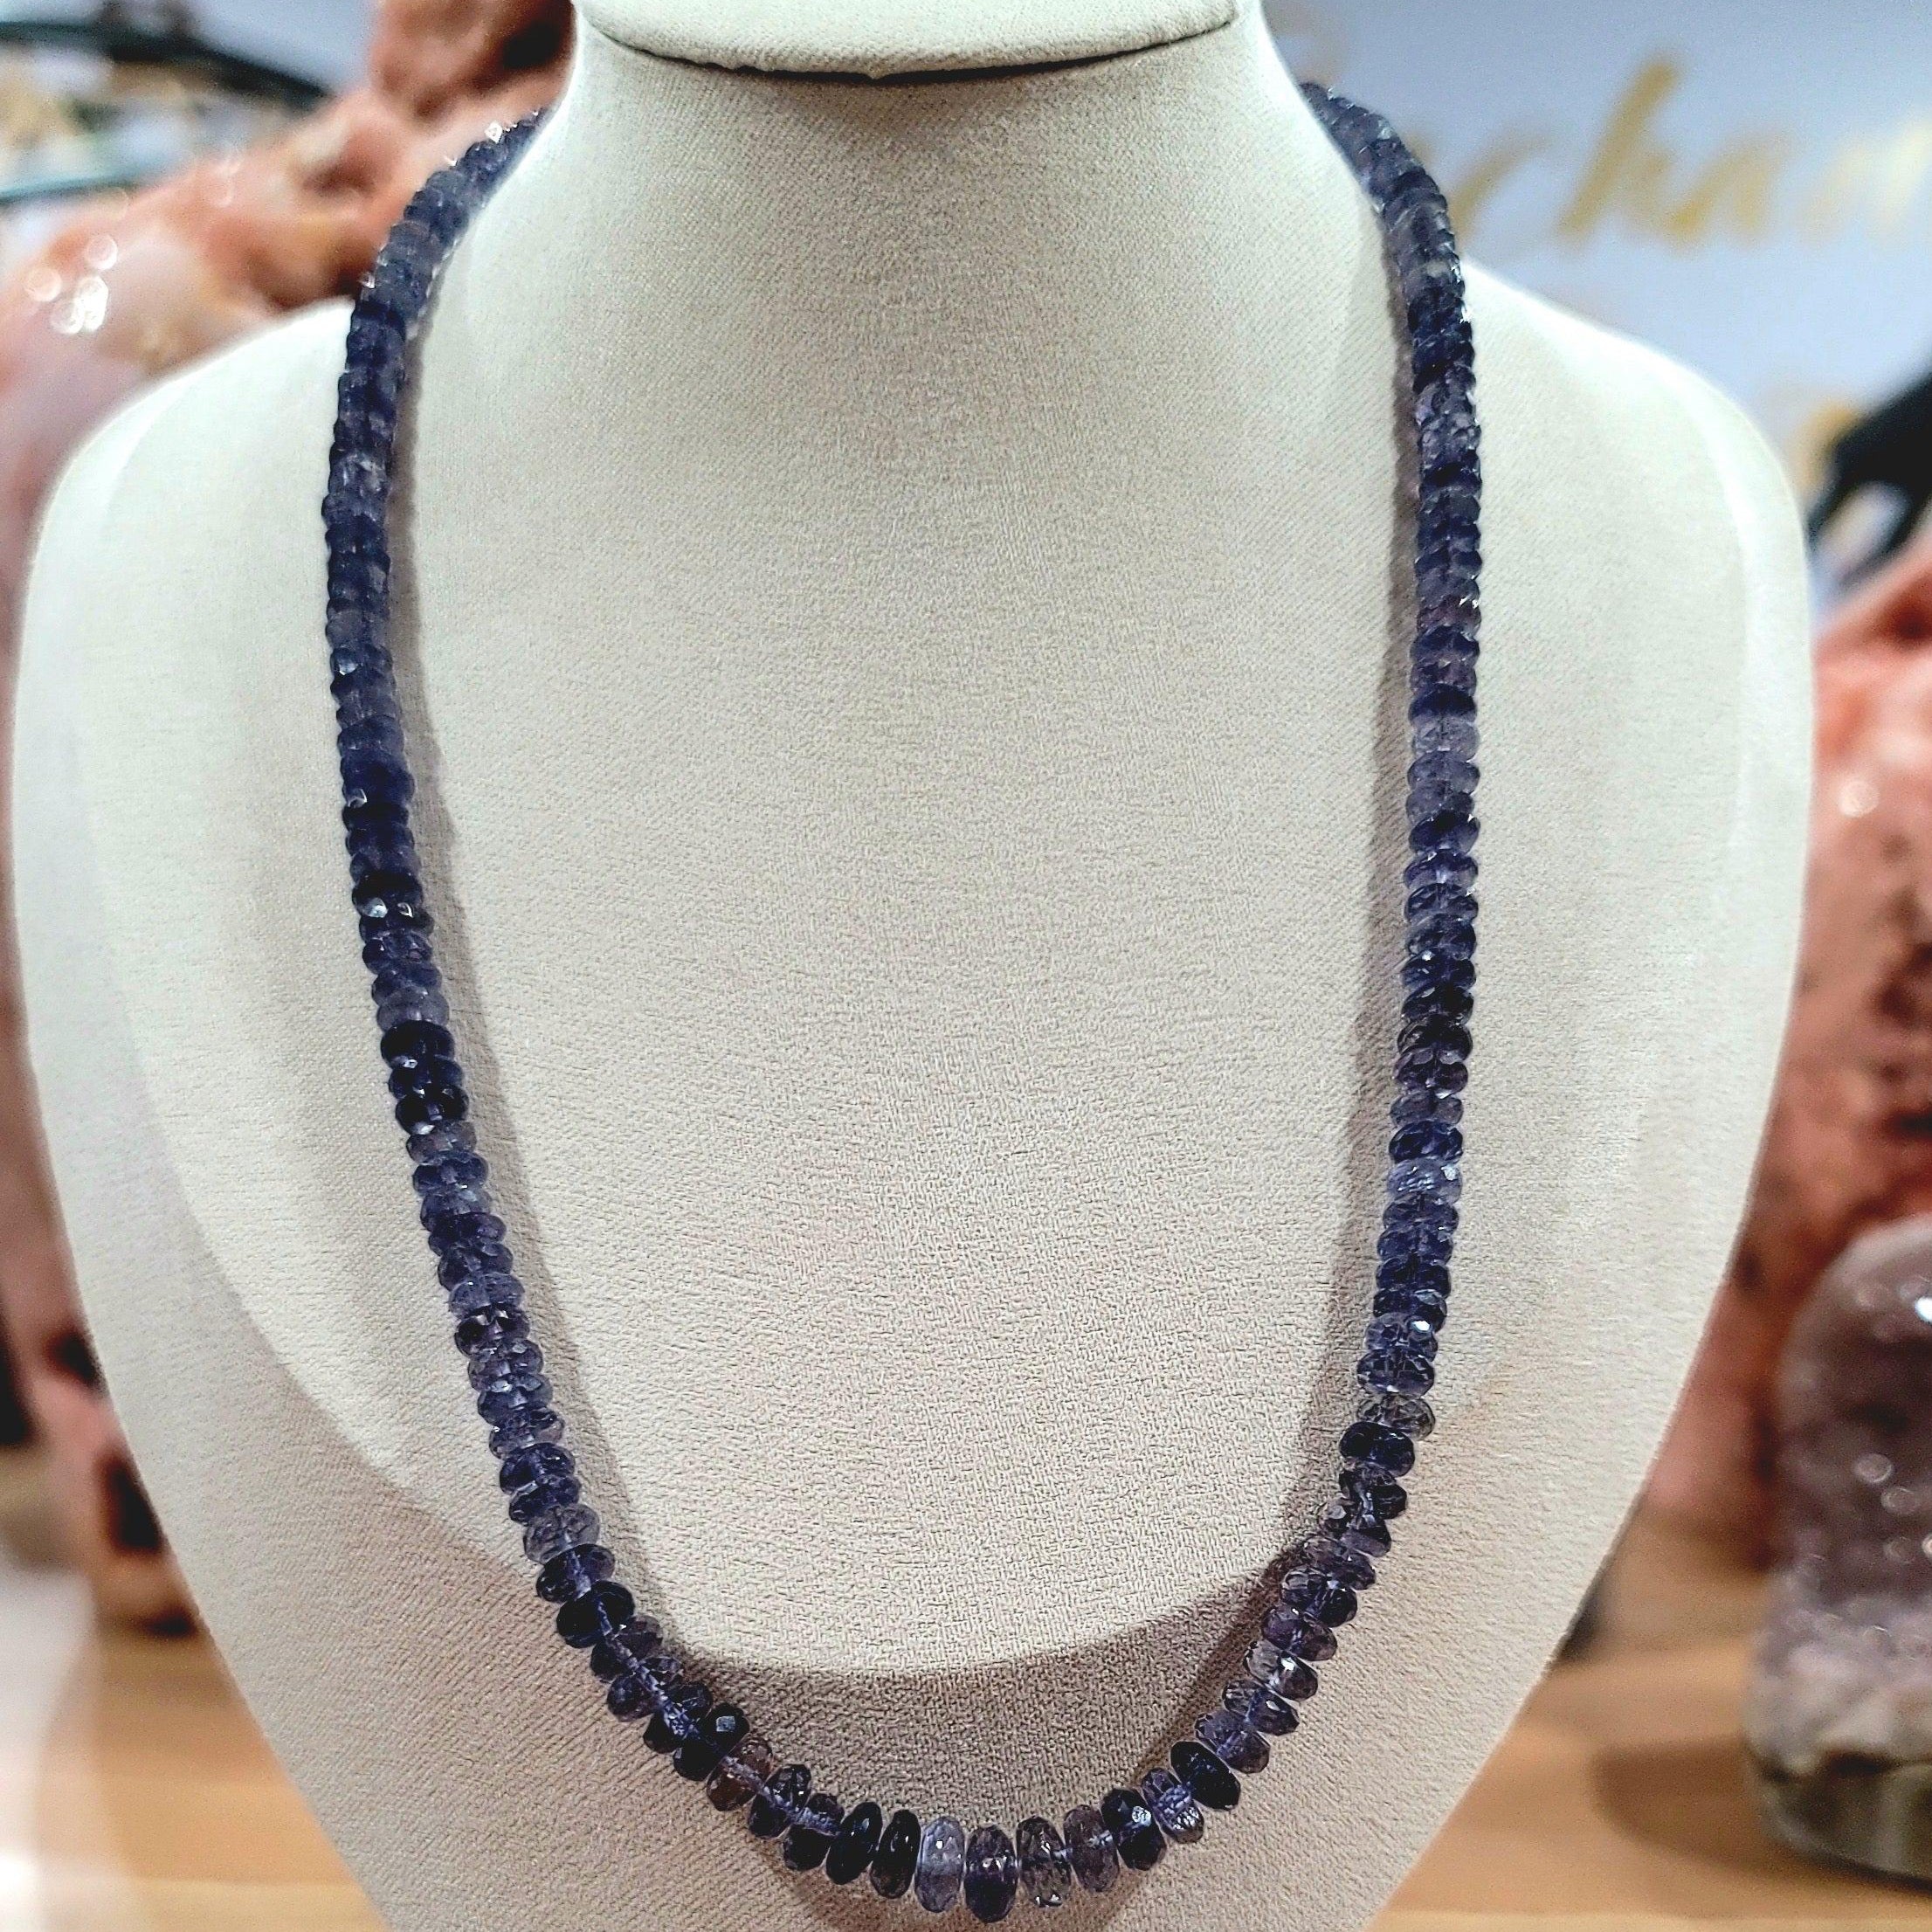 Iolite Necklace for Sharp Intuition & Visions